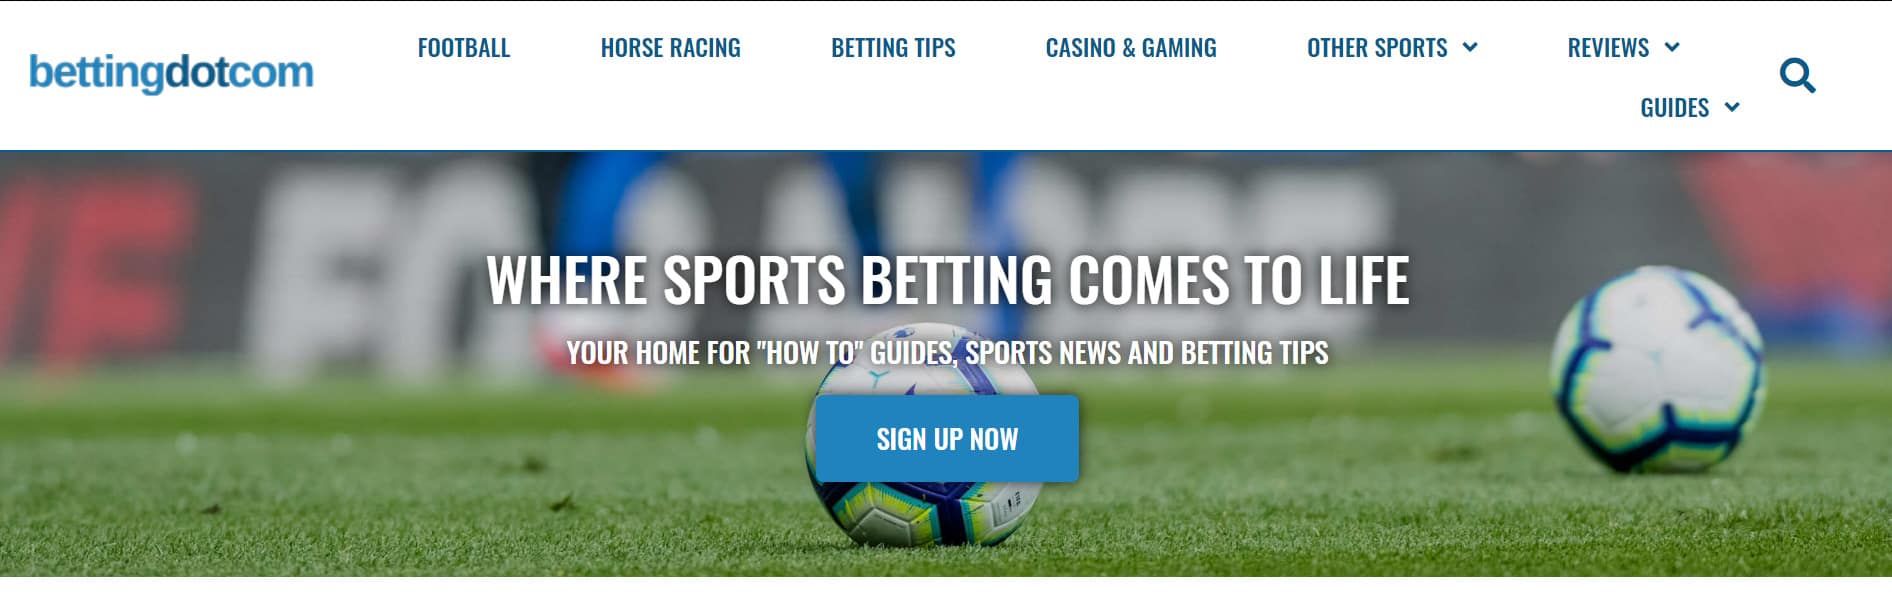 sigma igaming Game Lounge acquires domain name Betting.com 